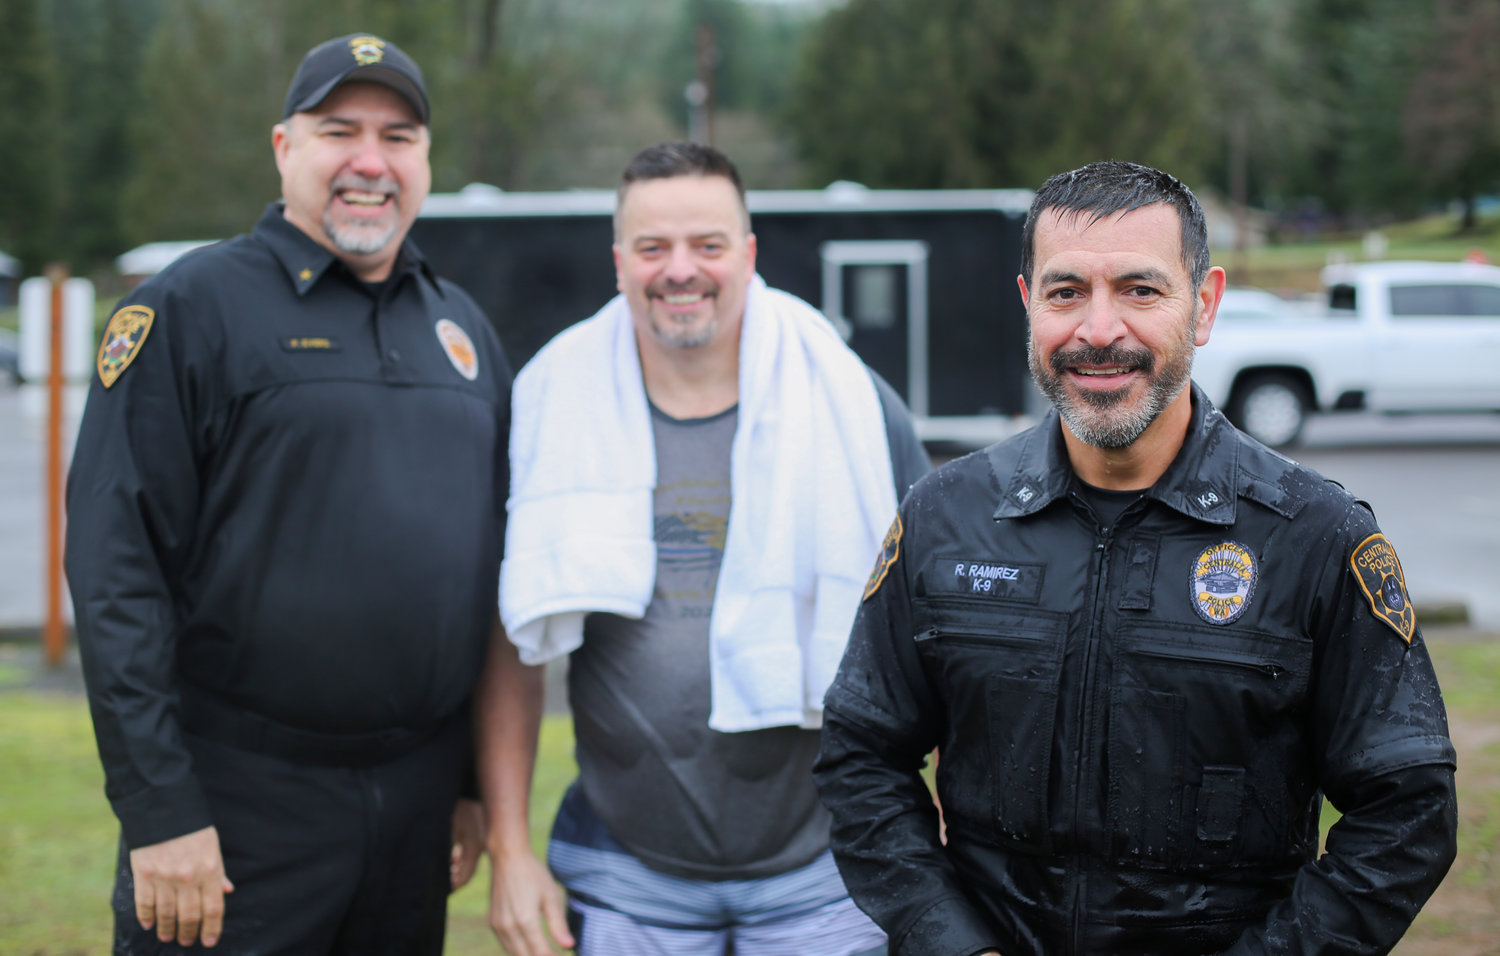 The 2023 Special Olympics Polar Plunge was again hosted by the Lewis County Icicle Brigade. State Rep. Peter Abbarno and members of the Centralia Police Department led what has become an annual January tradition.